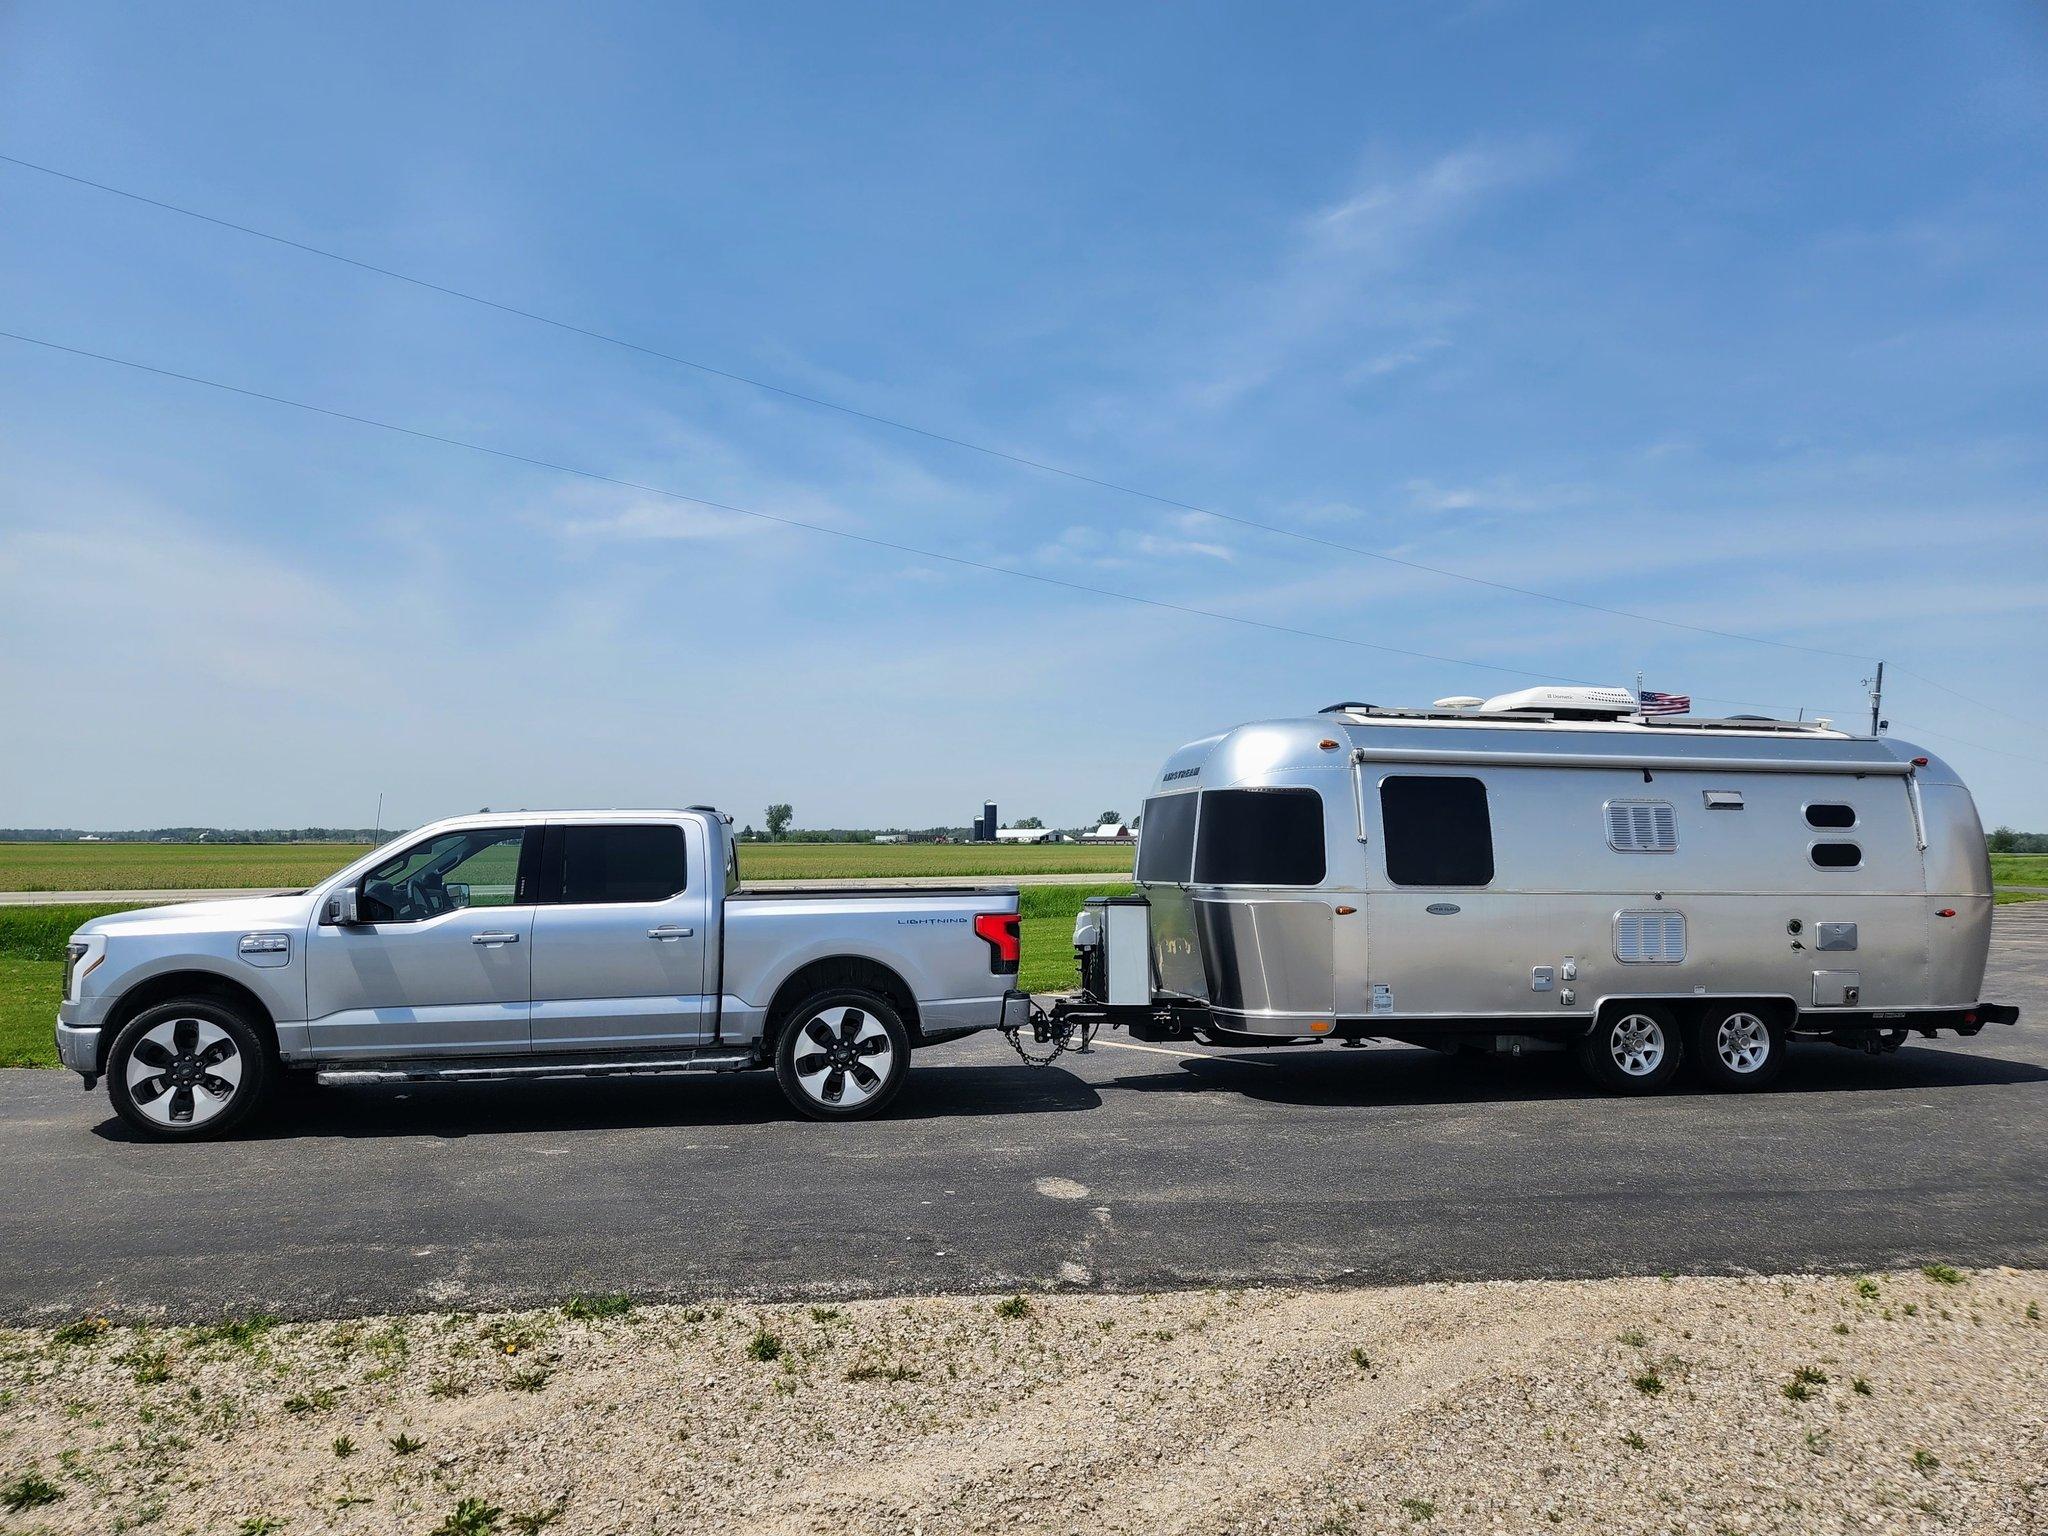 Ford F-150 Lightning Lightning Towing Stats with my 23FB Airstream Trailer FUBqwrWX0AMC2cu